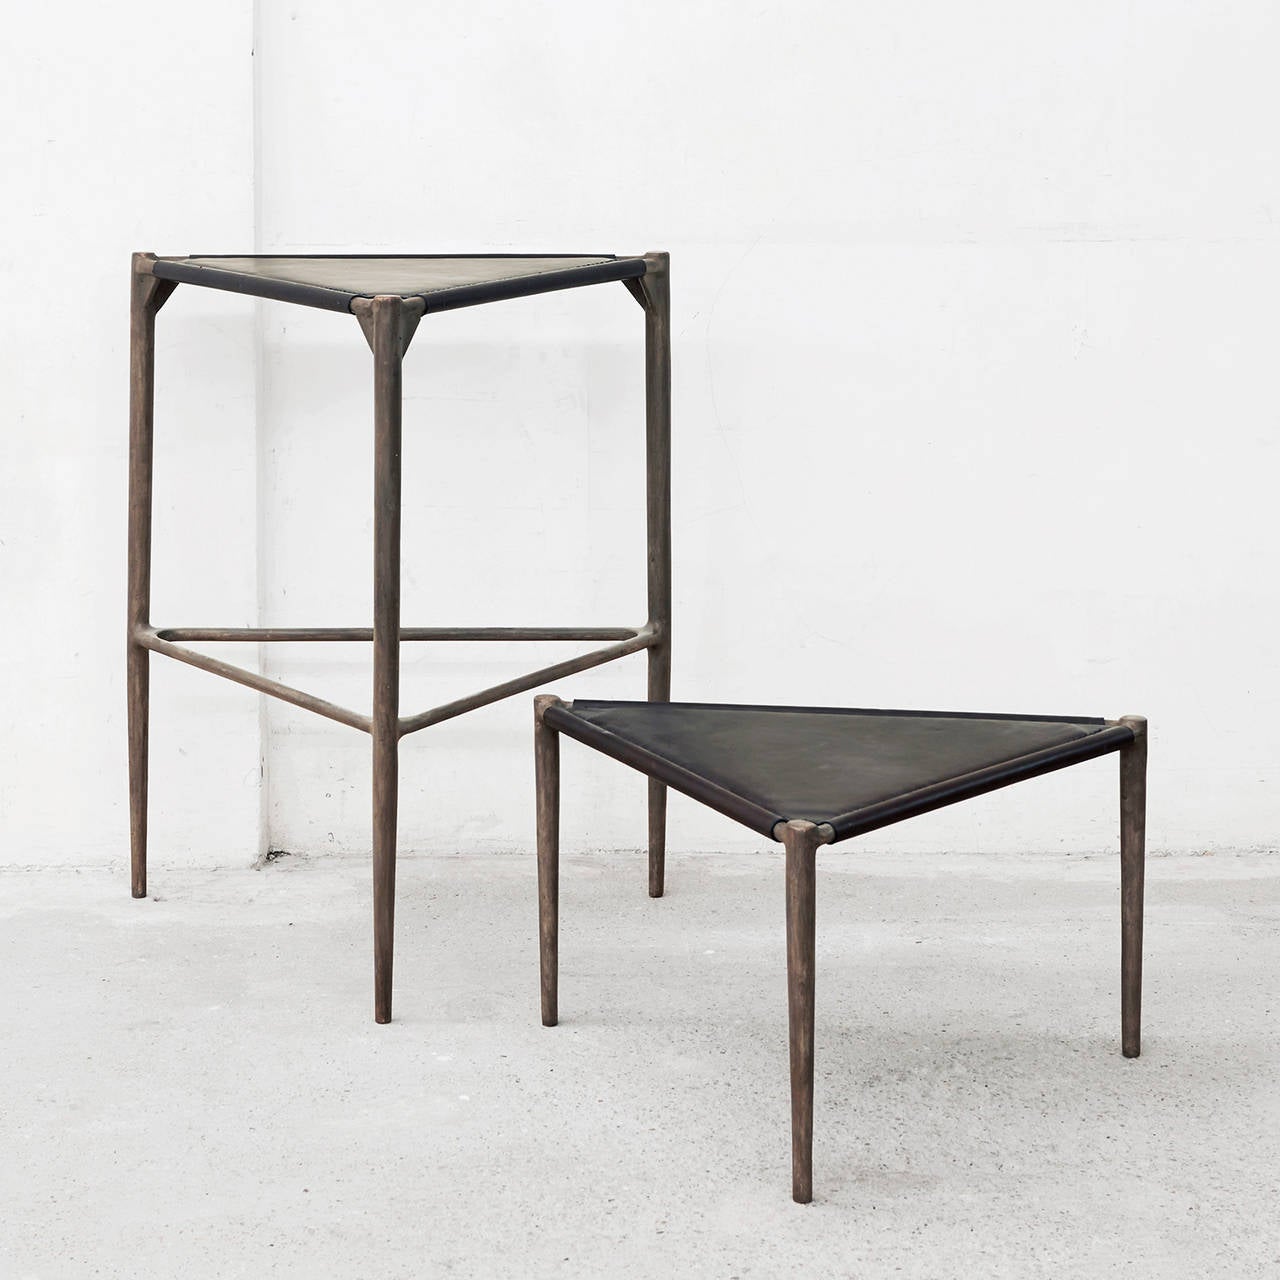 Alchemy Bar Stool by Rick Owens available from LMD/studio. 

The Rick Owens Alchemy Barstool feautres a bold three-legged design in texturally rich cast bronze. The barstool seat is wrapped in a soft stitched leather giving the stool a tactile,